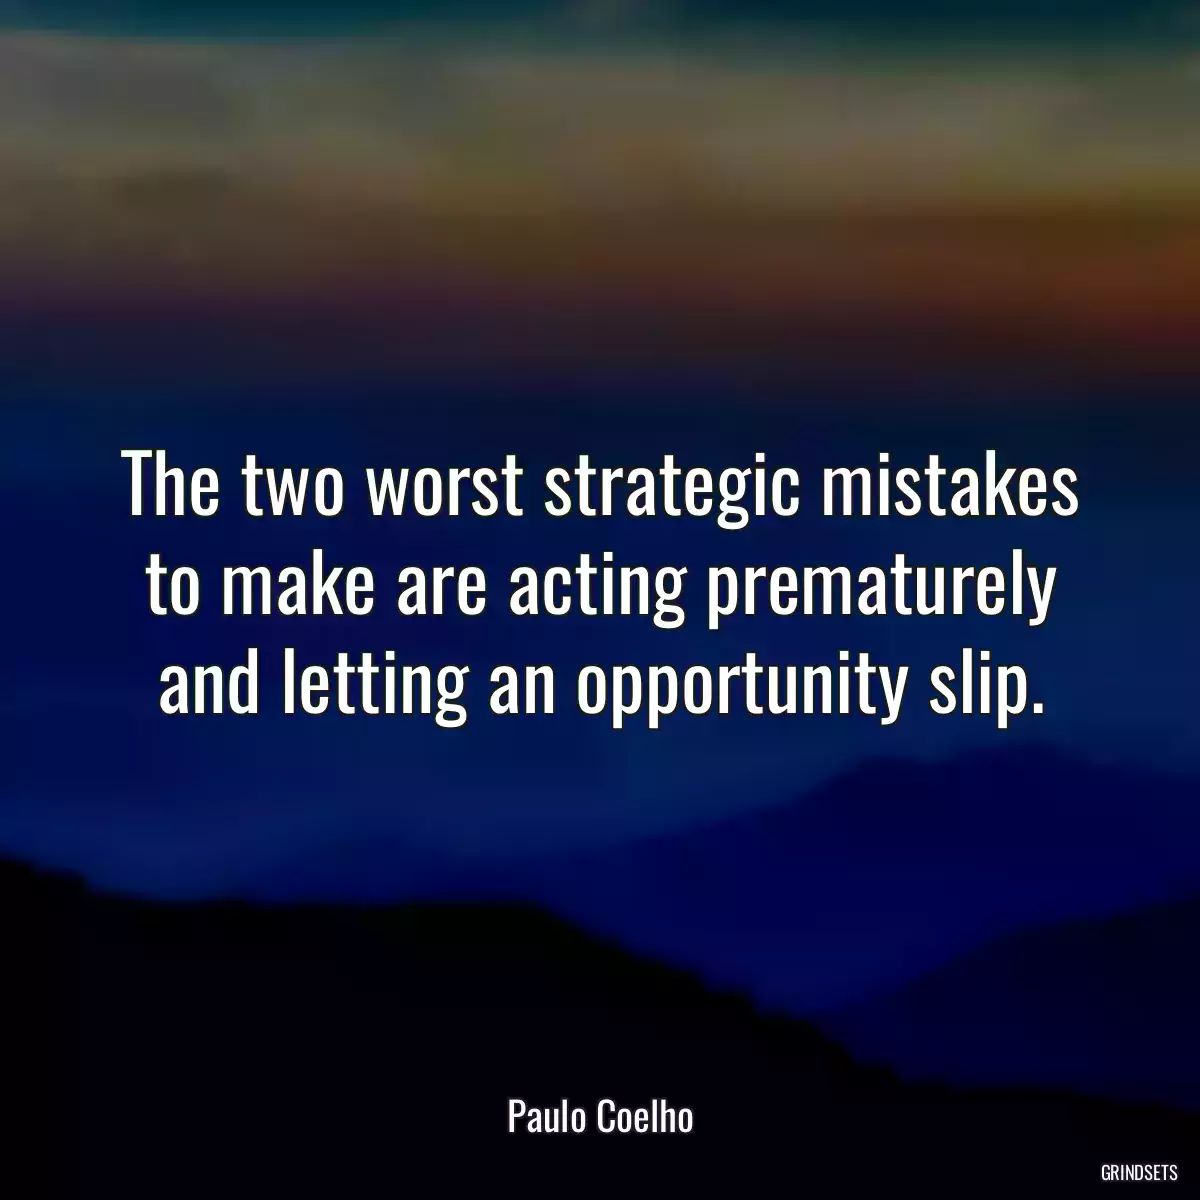 The two worst strategic mistakes to make are acting prematurely and letting an opportunity slip.